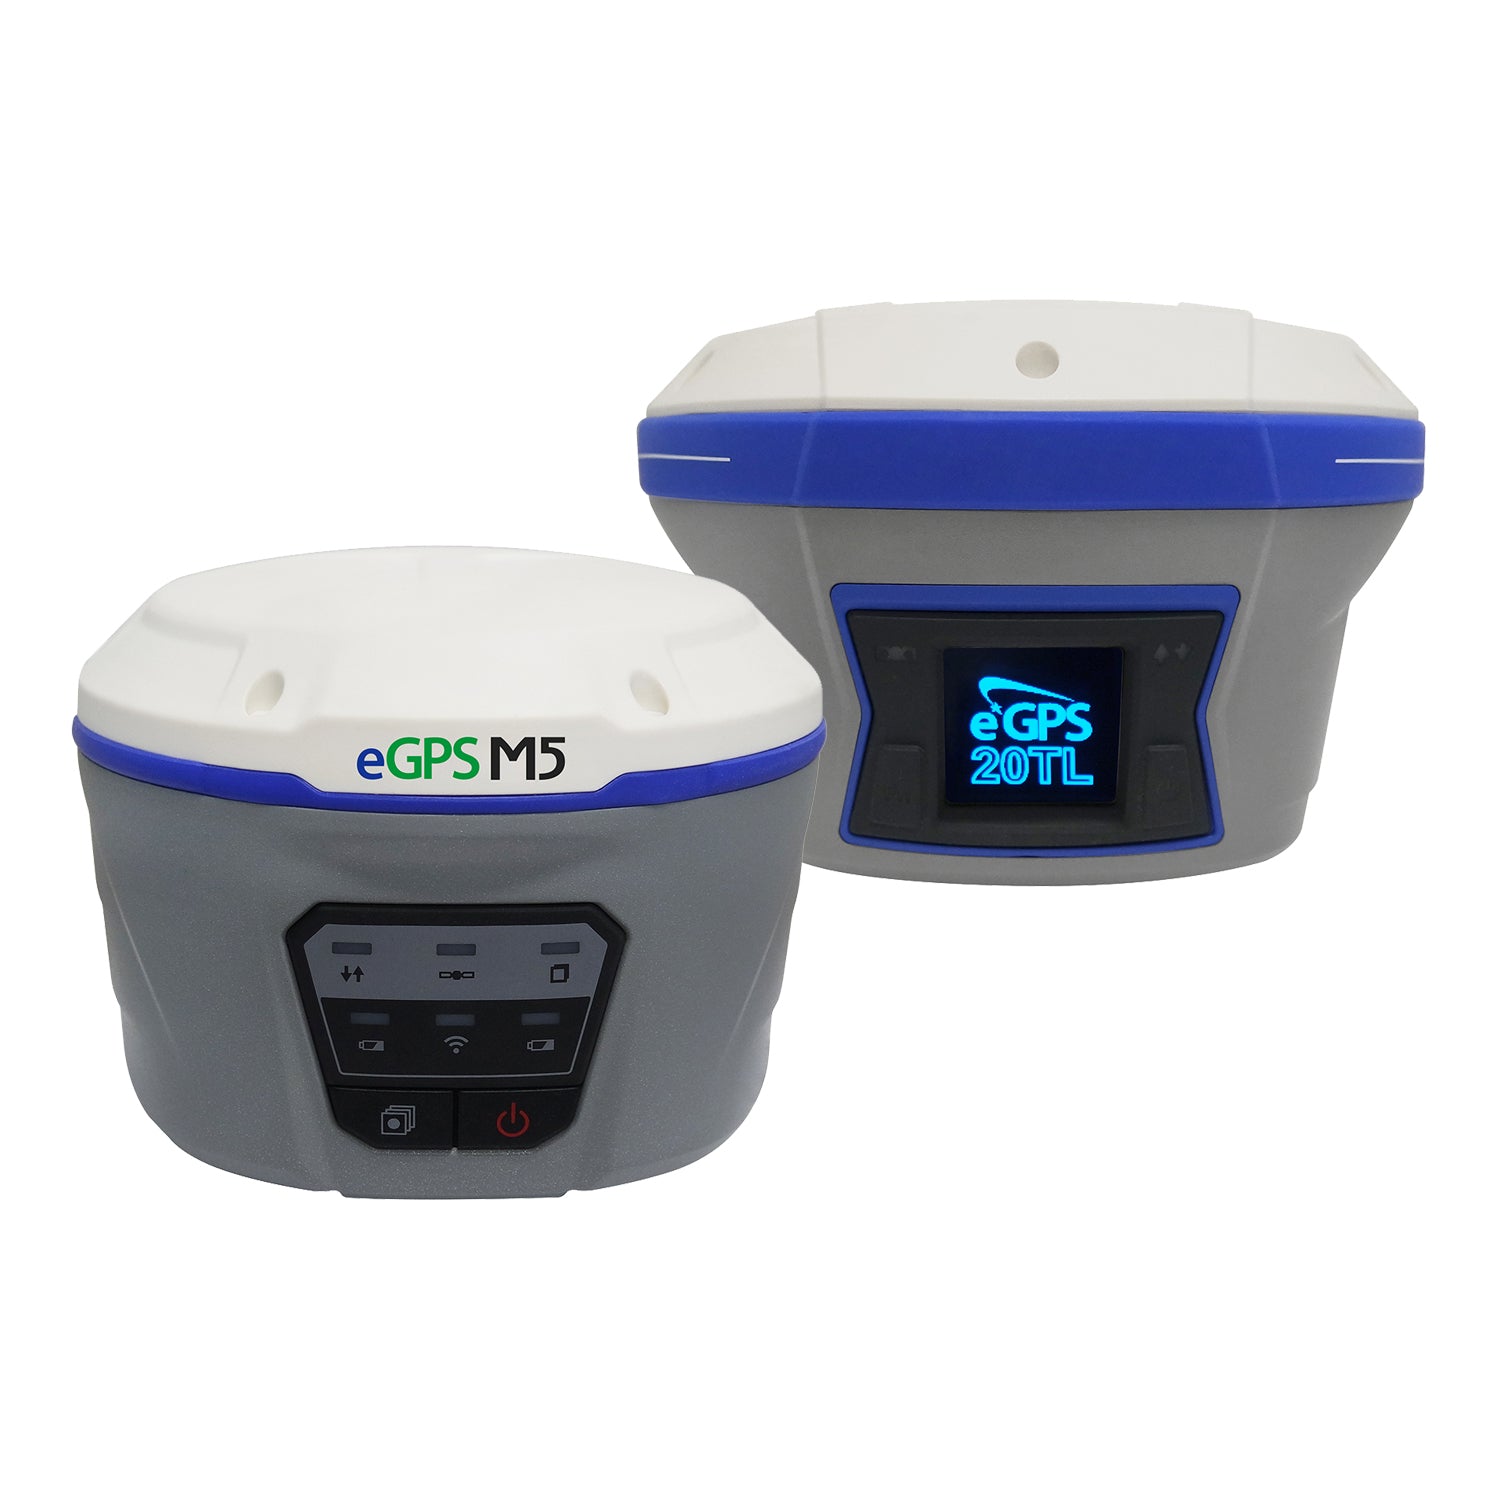 eGPS M7 and CHC i80 GNSS Receivers